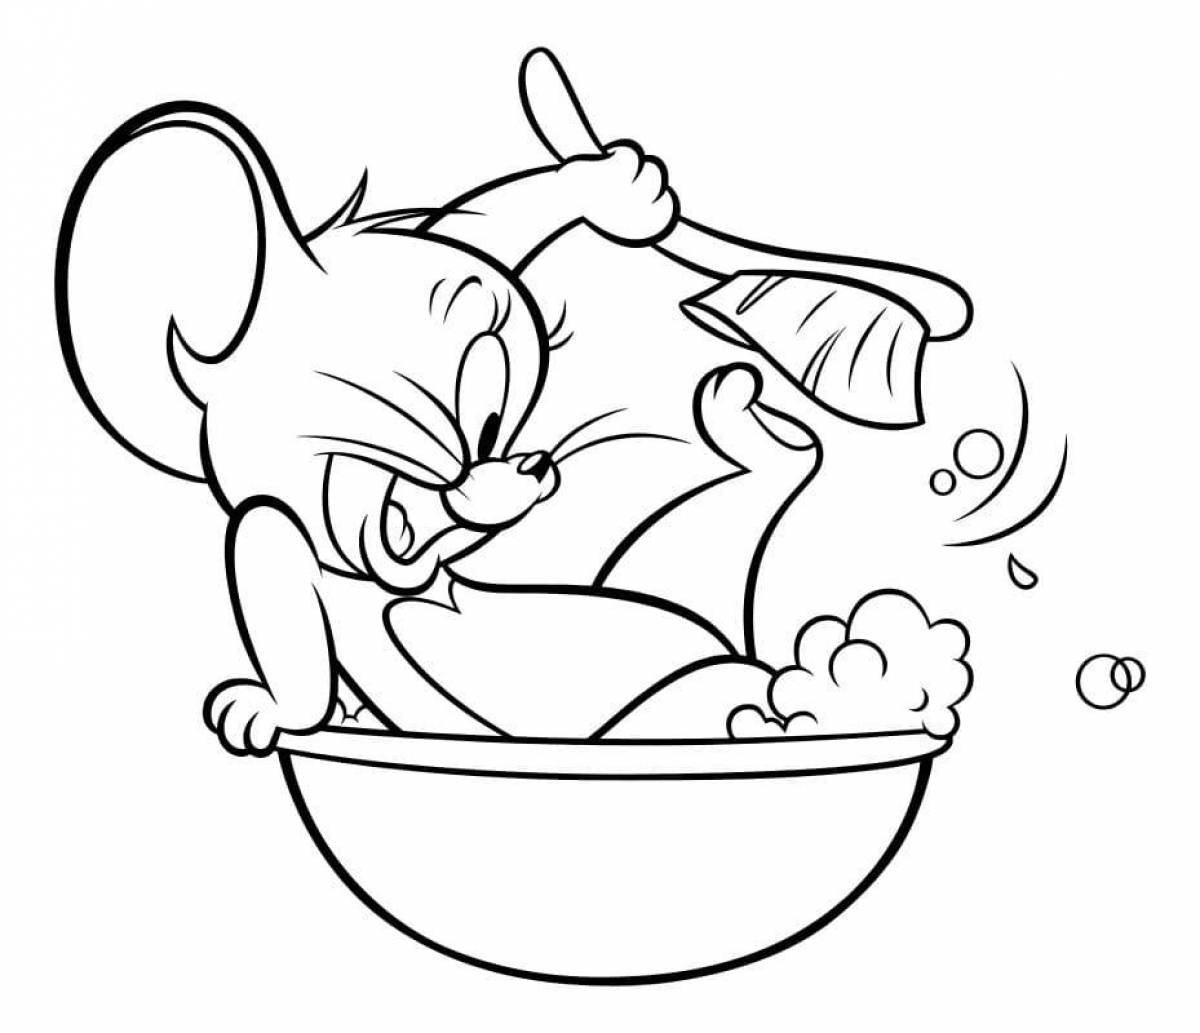 Fancy tom and jerry coloring pages for kids